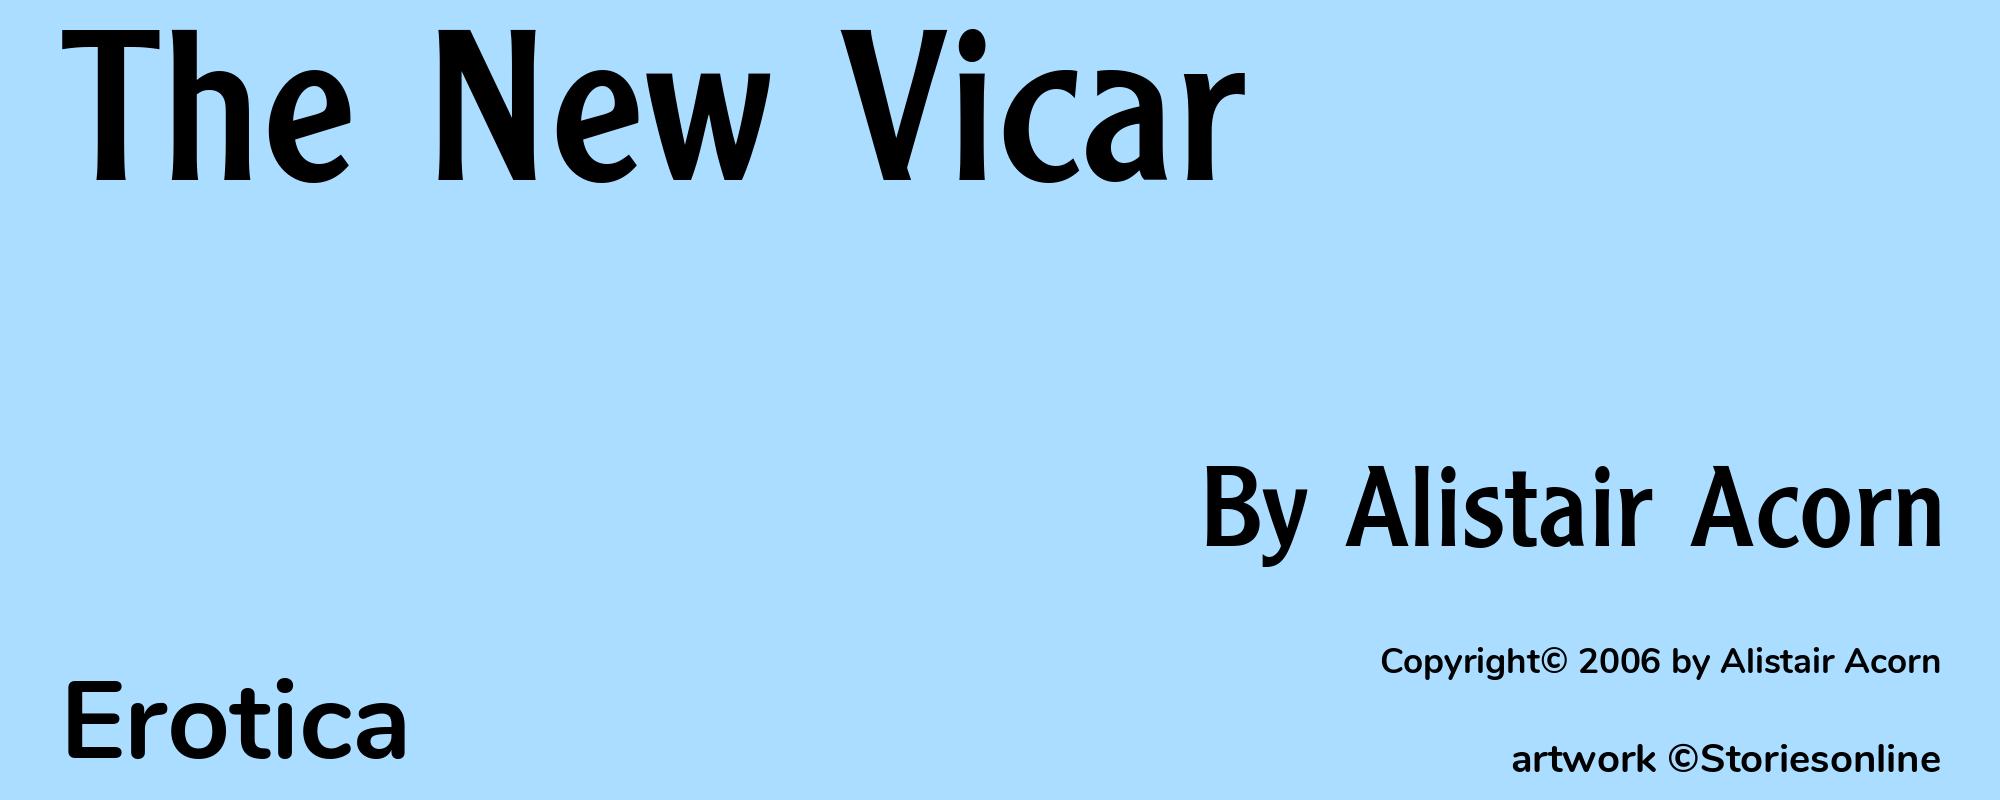 The New Vicar - Cover